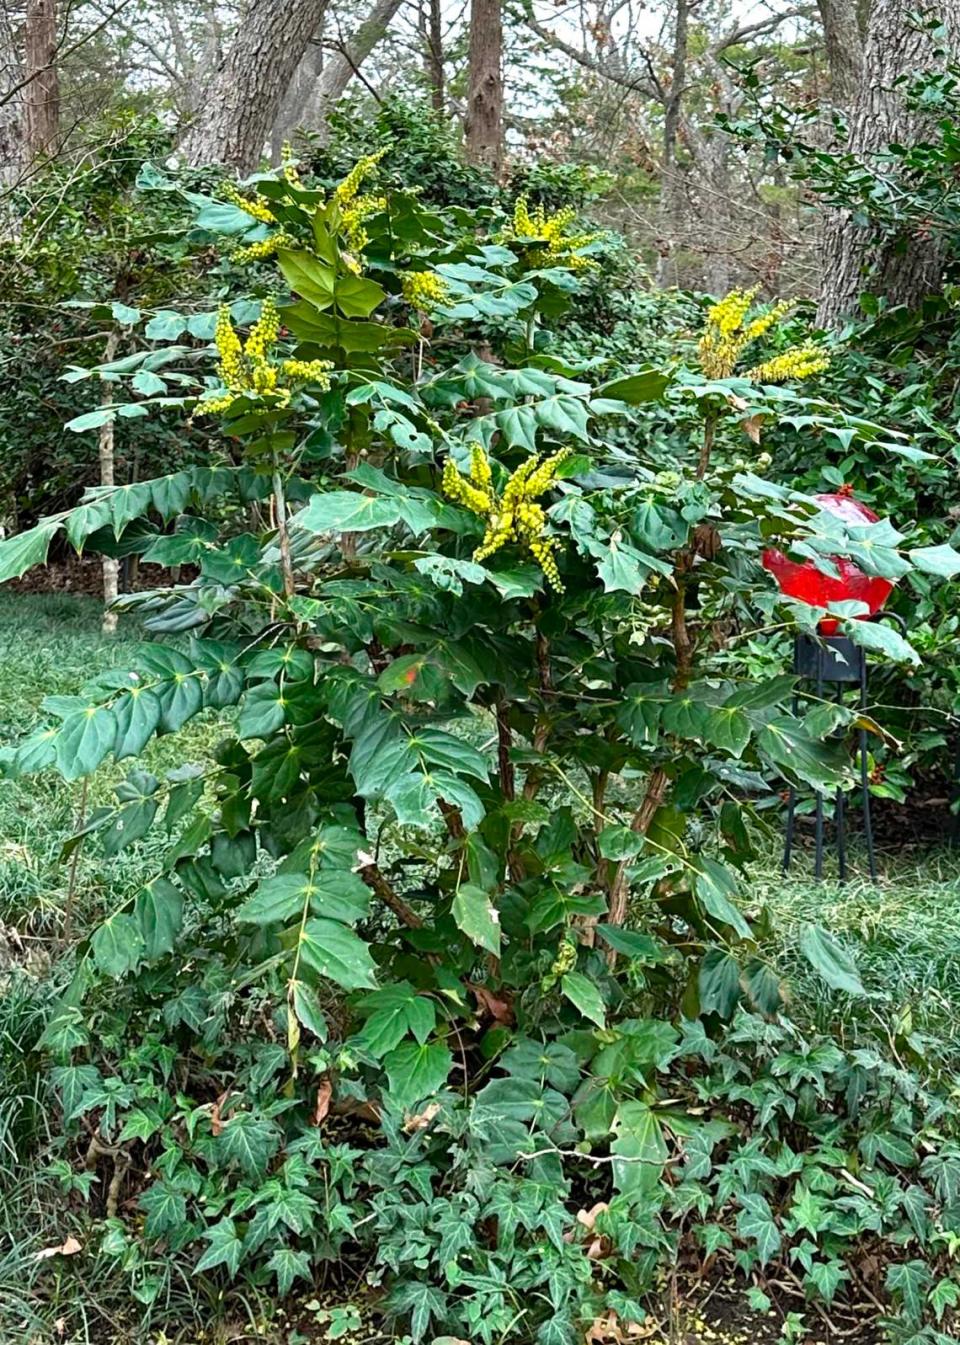 Leatherleaf mahonia with a red gazing ball is seen in the Sperry landscape.